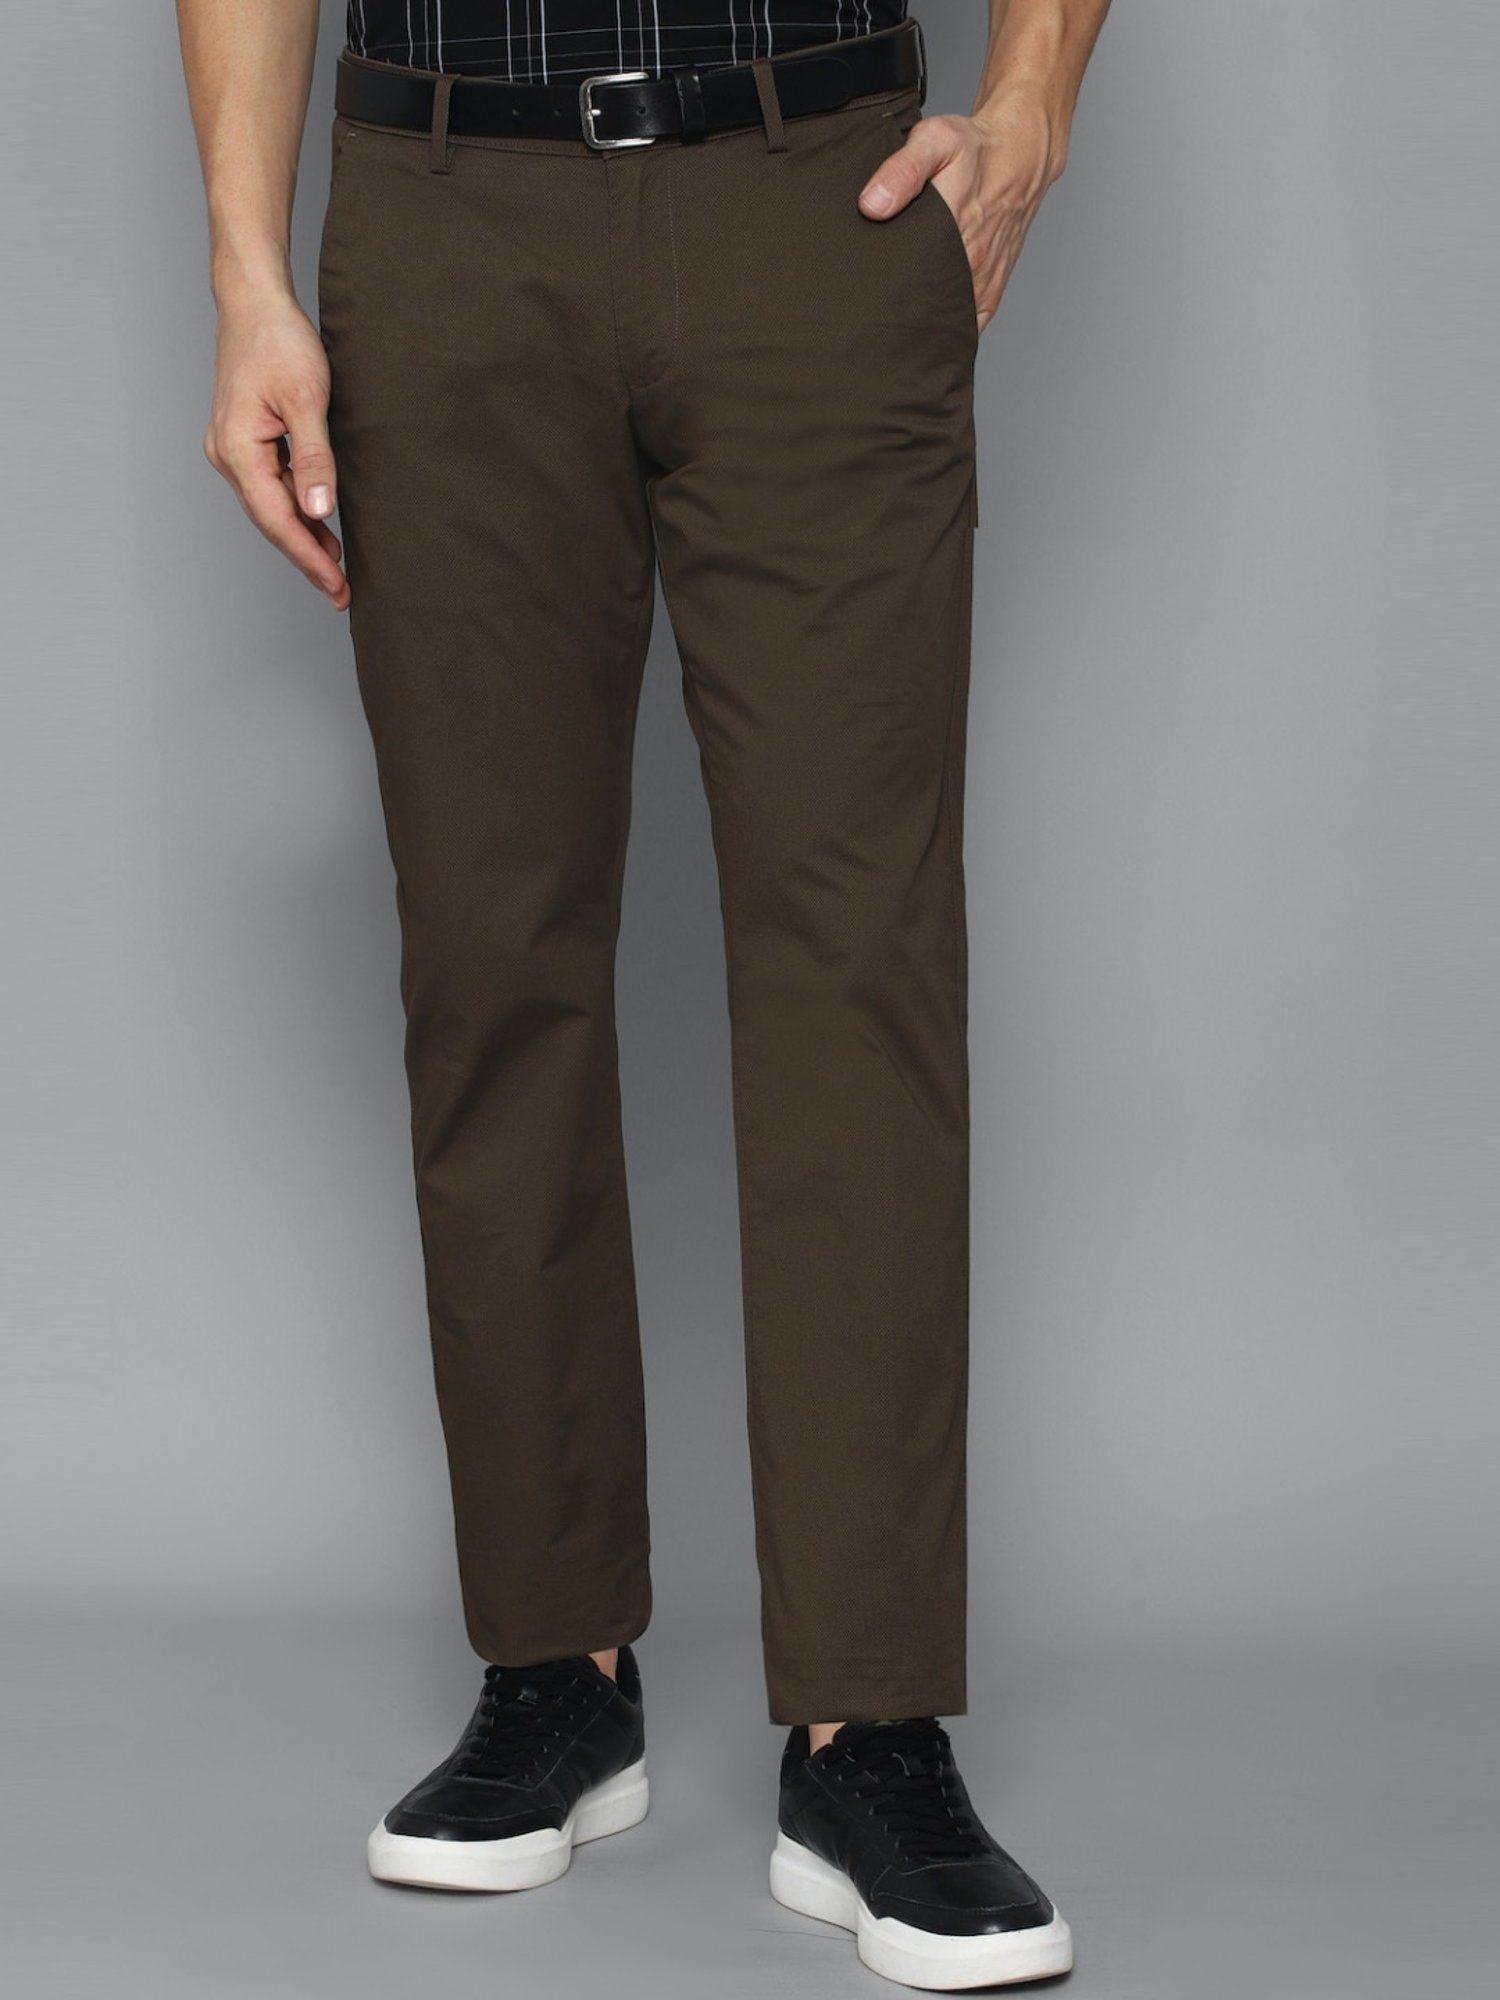 Buy ROYAL ENFIELD Brown Solid Cotton Regular Fit Mens Trousers  Shoppers  Stop